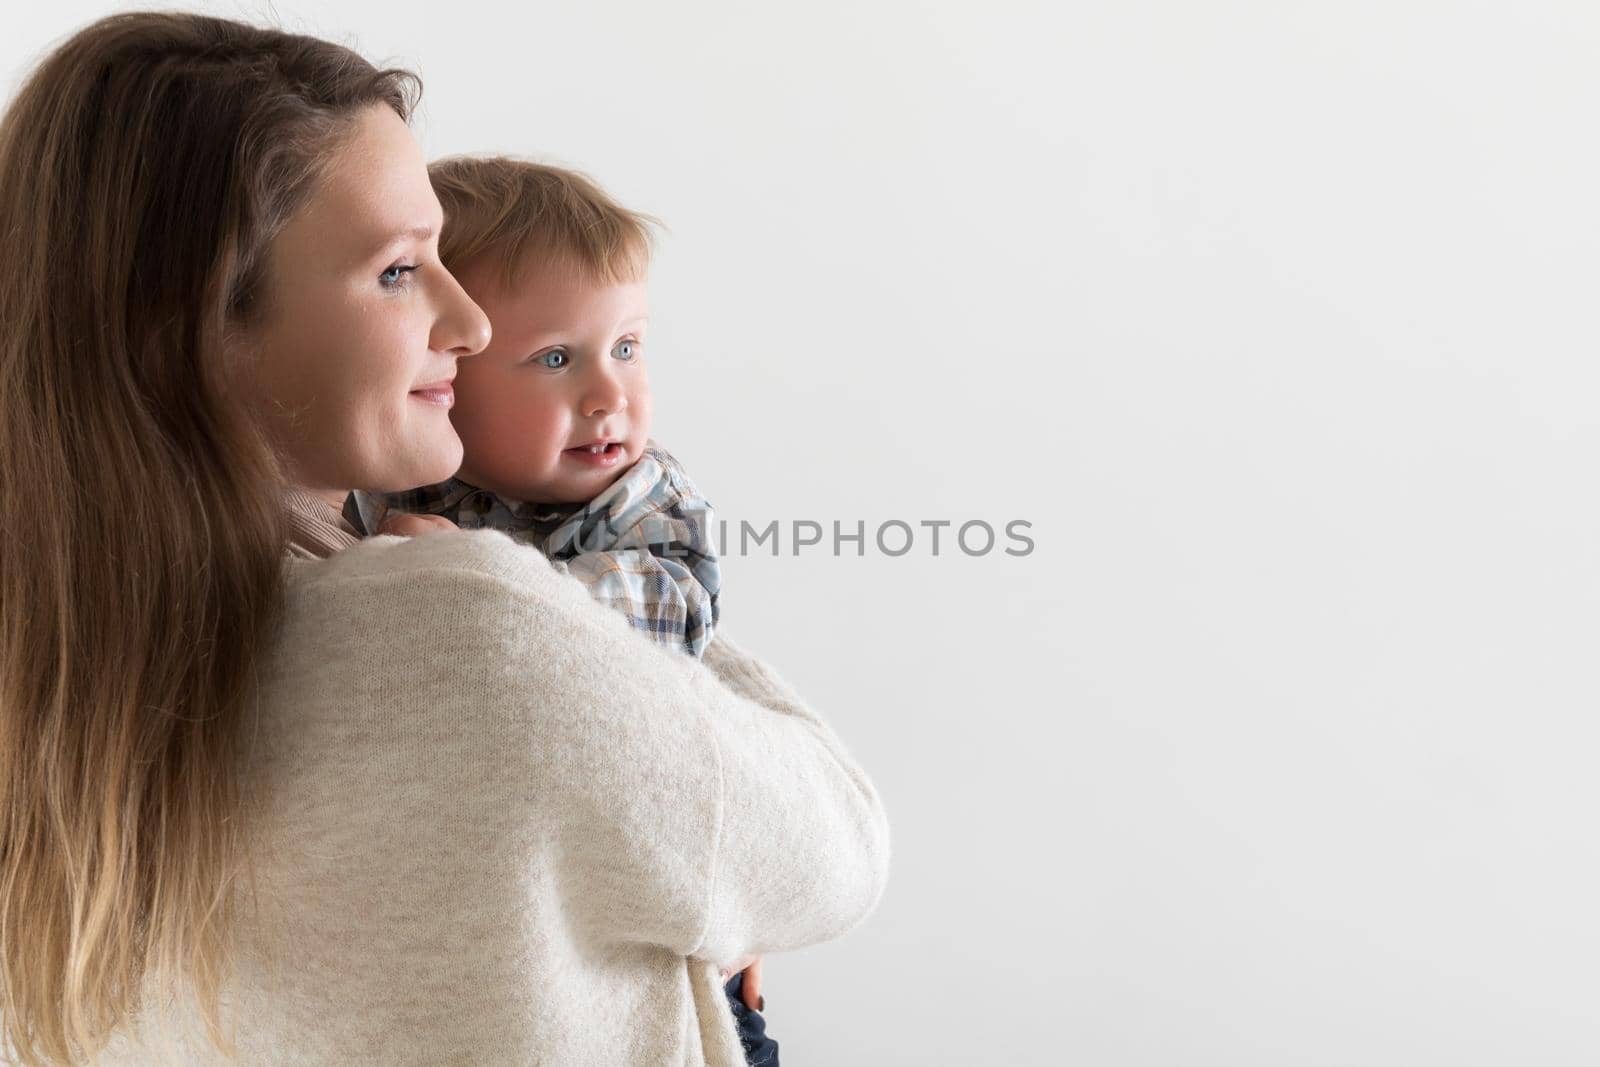 Young european mother with holds a baby in hugs on a white background, both look in one direction, copy space.